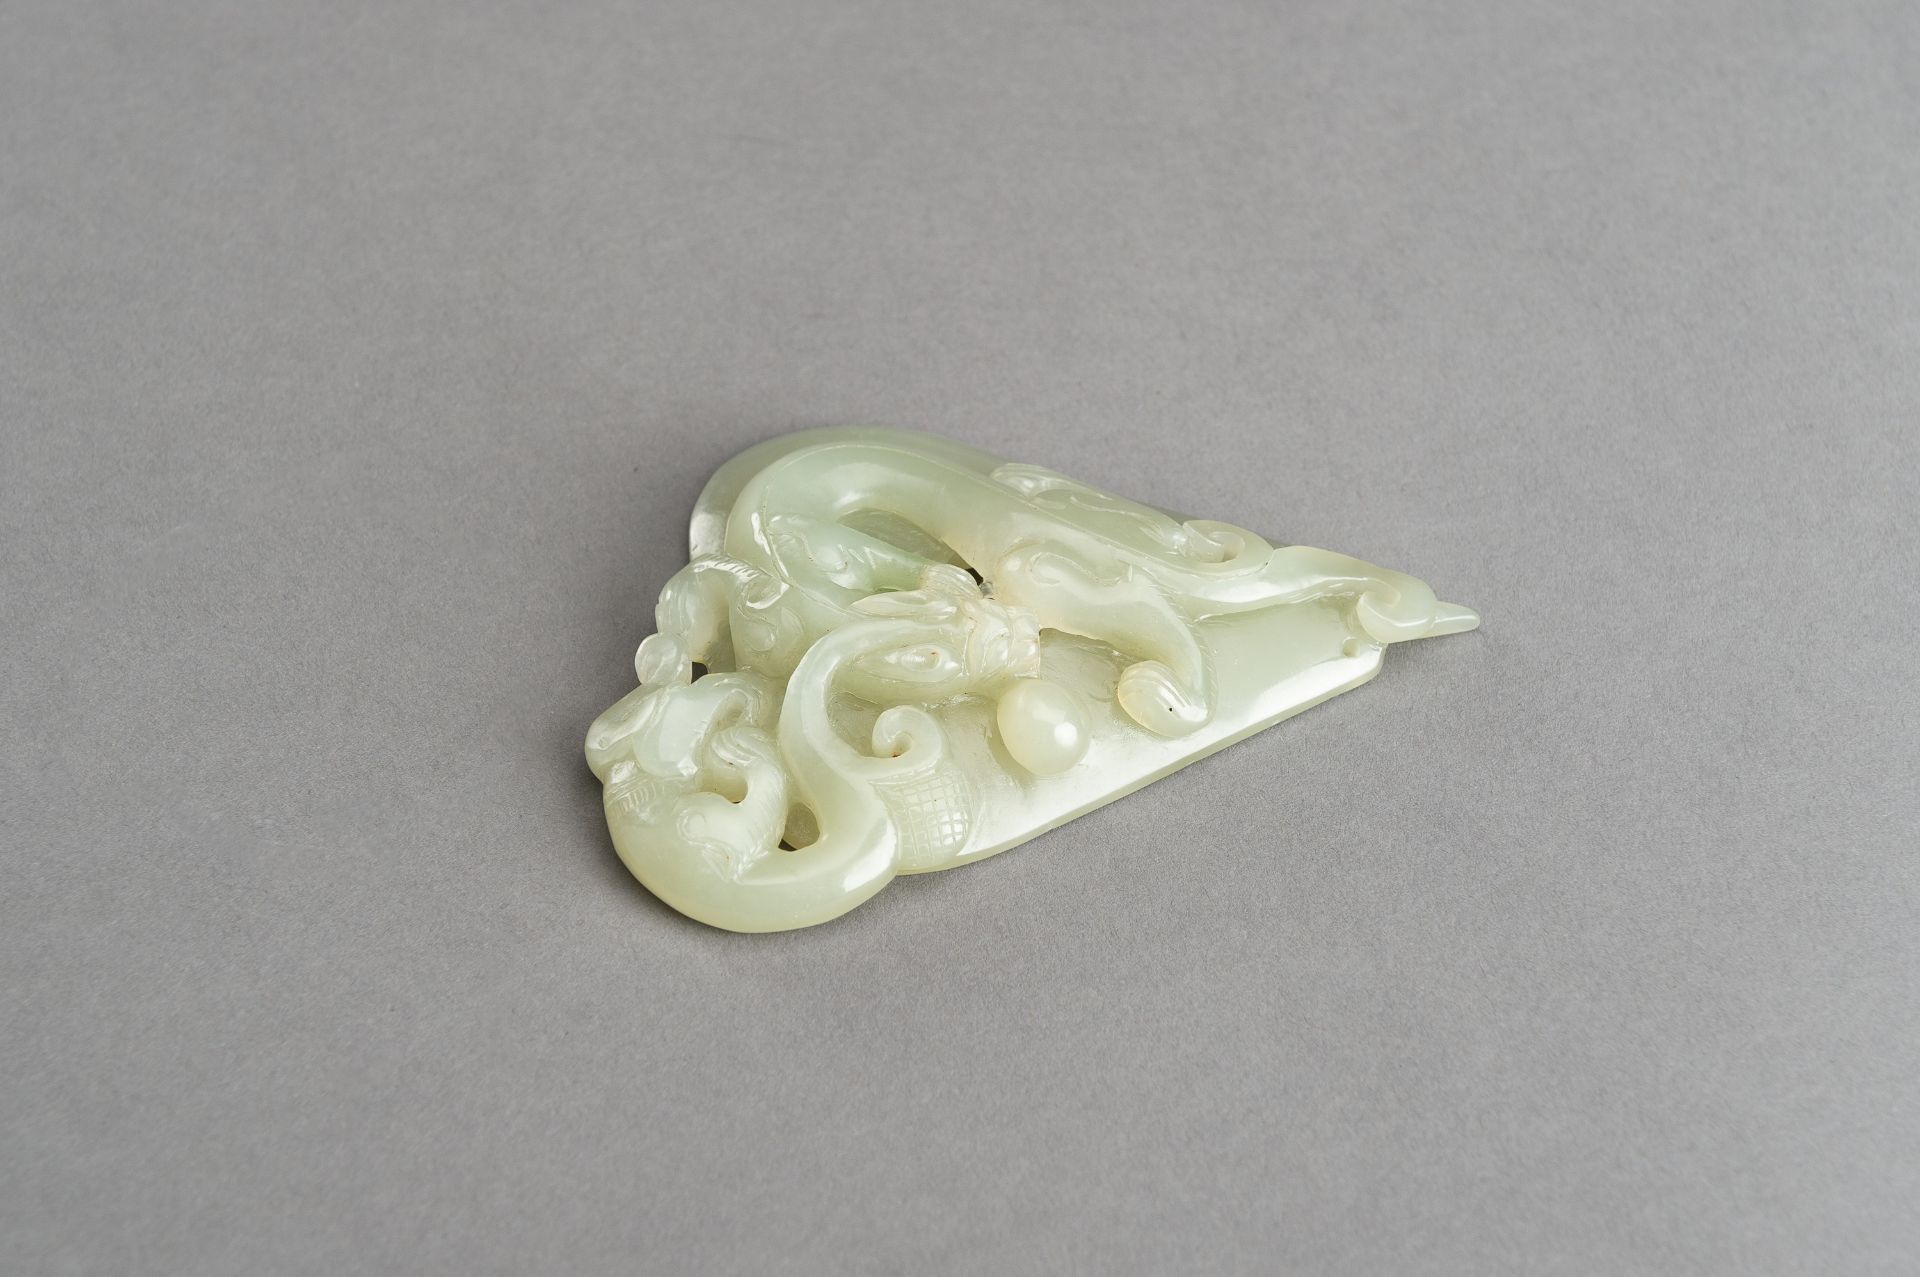 AN ARCHAISTIC PALE CELADON JADE PENDANT OF A CHILONG, 1920s - Image 10 of 14